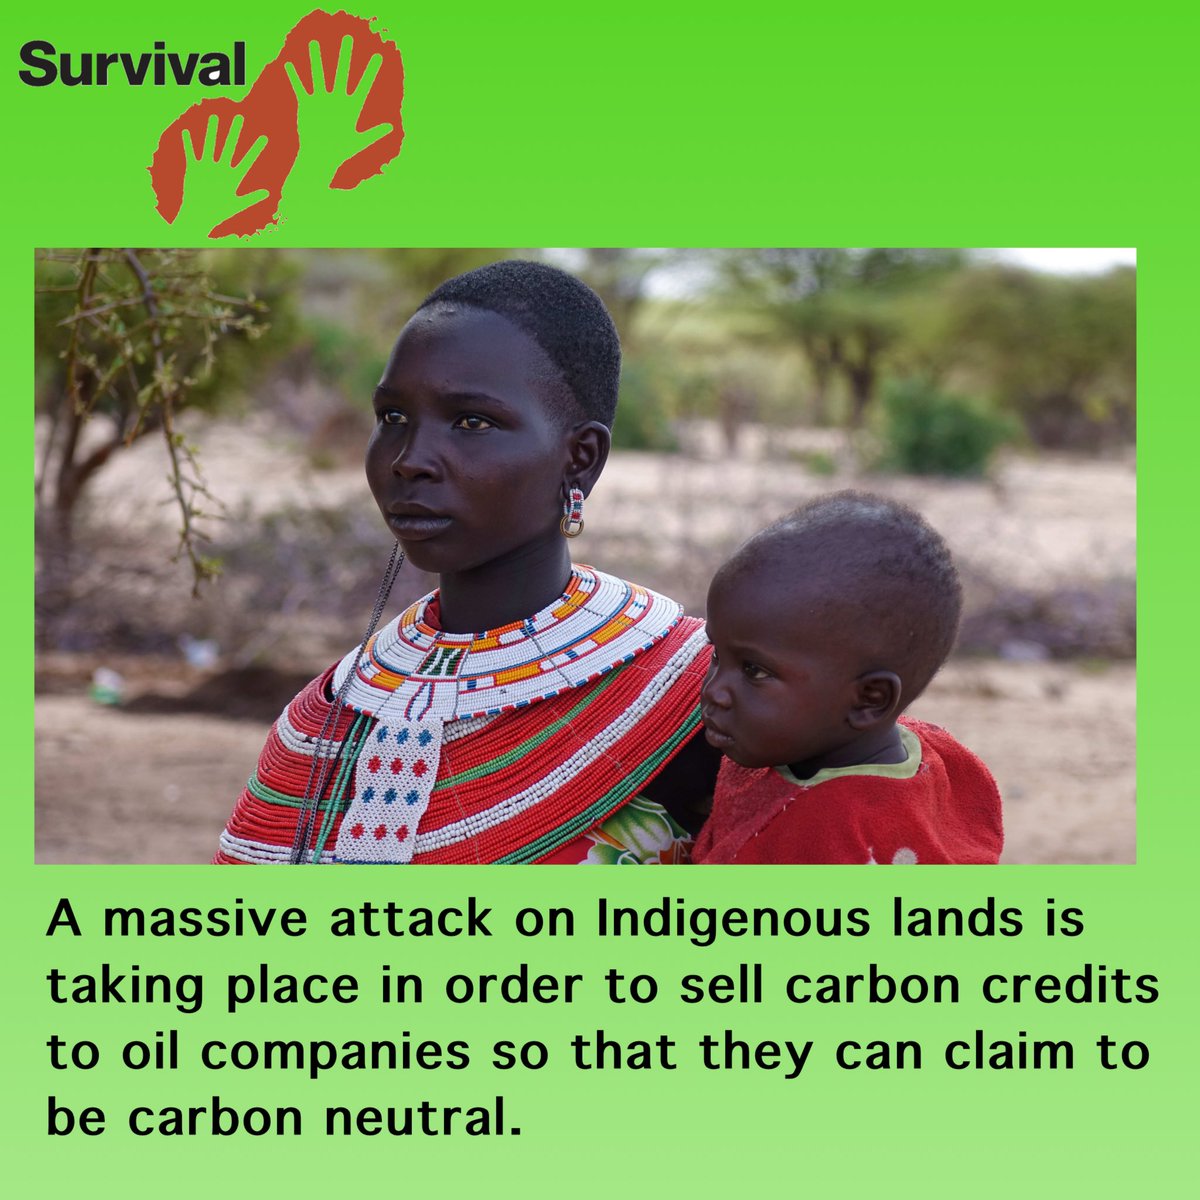 Increasingly, Indigenous territories are being targeted for carbon offset schemes. Protected Areas – which usually lead to evictions and violence against local people - are now being justified by claims about their potential to ‘store’ carbon. Act now! svlint.org/BloodCarbonTW